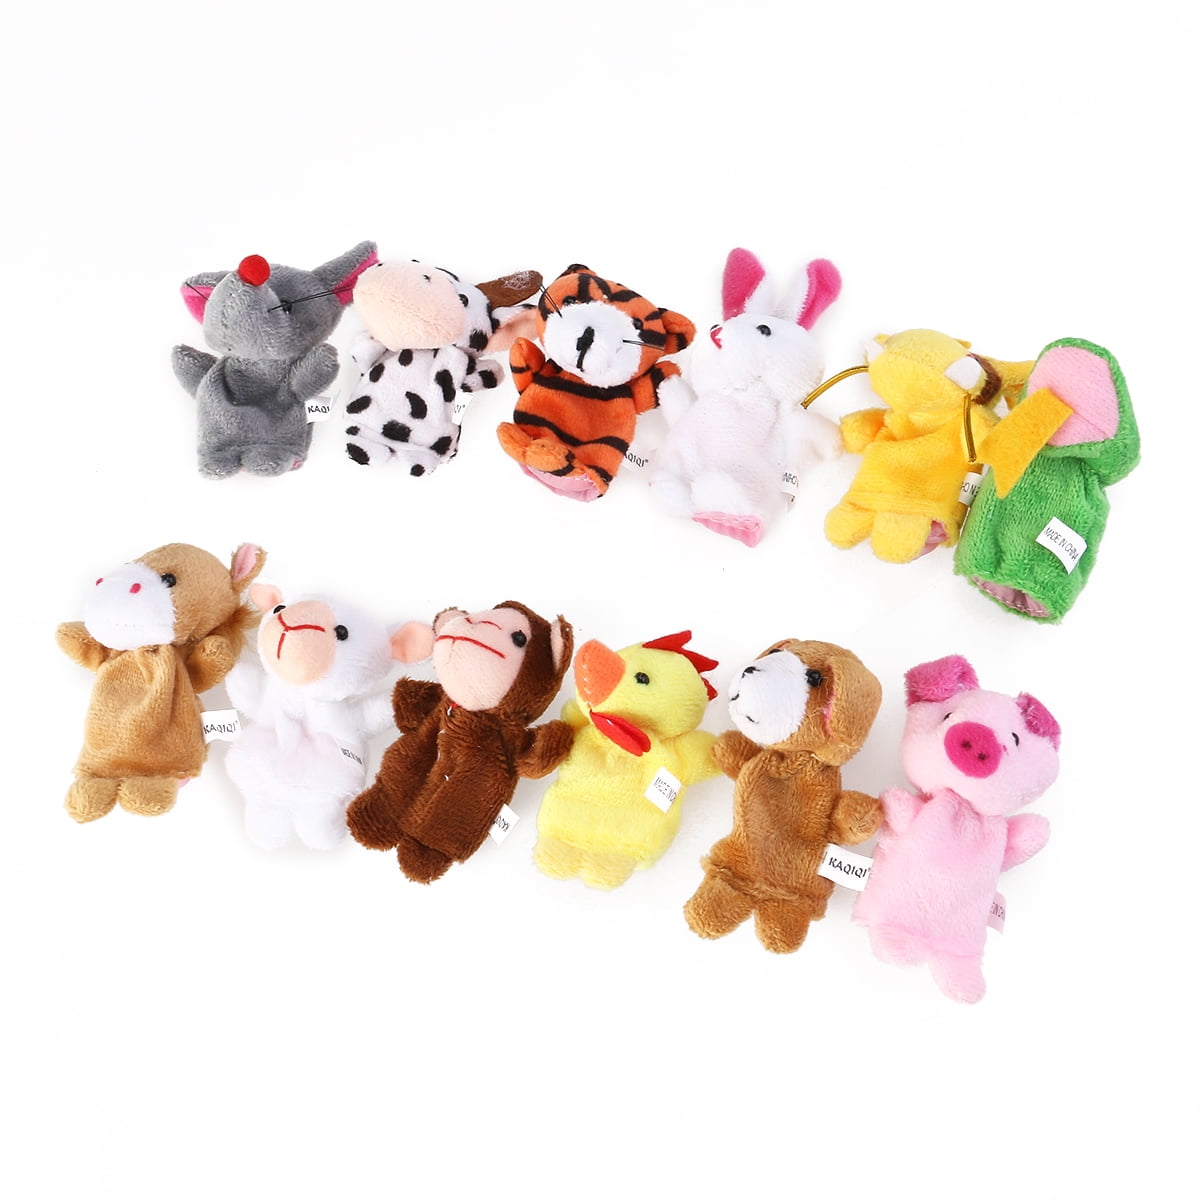 18pcs Educational Toys Animals & People Finger Puppets Story Time Finger Puppets